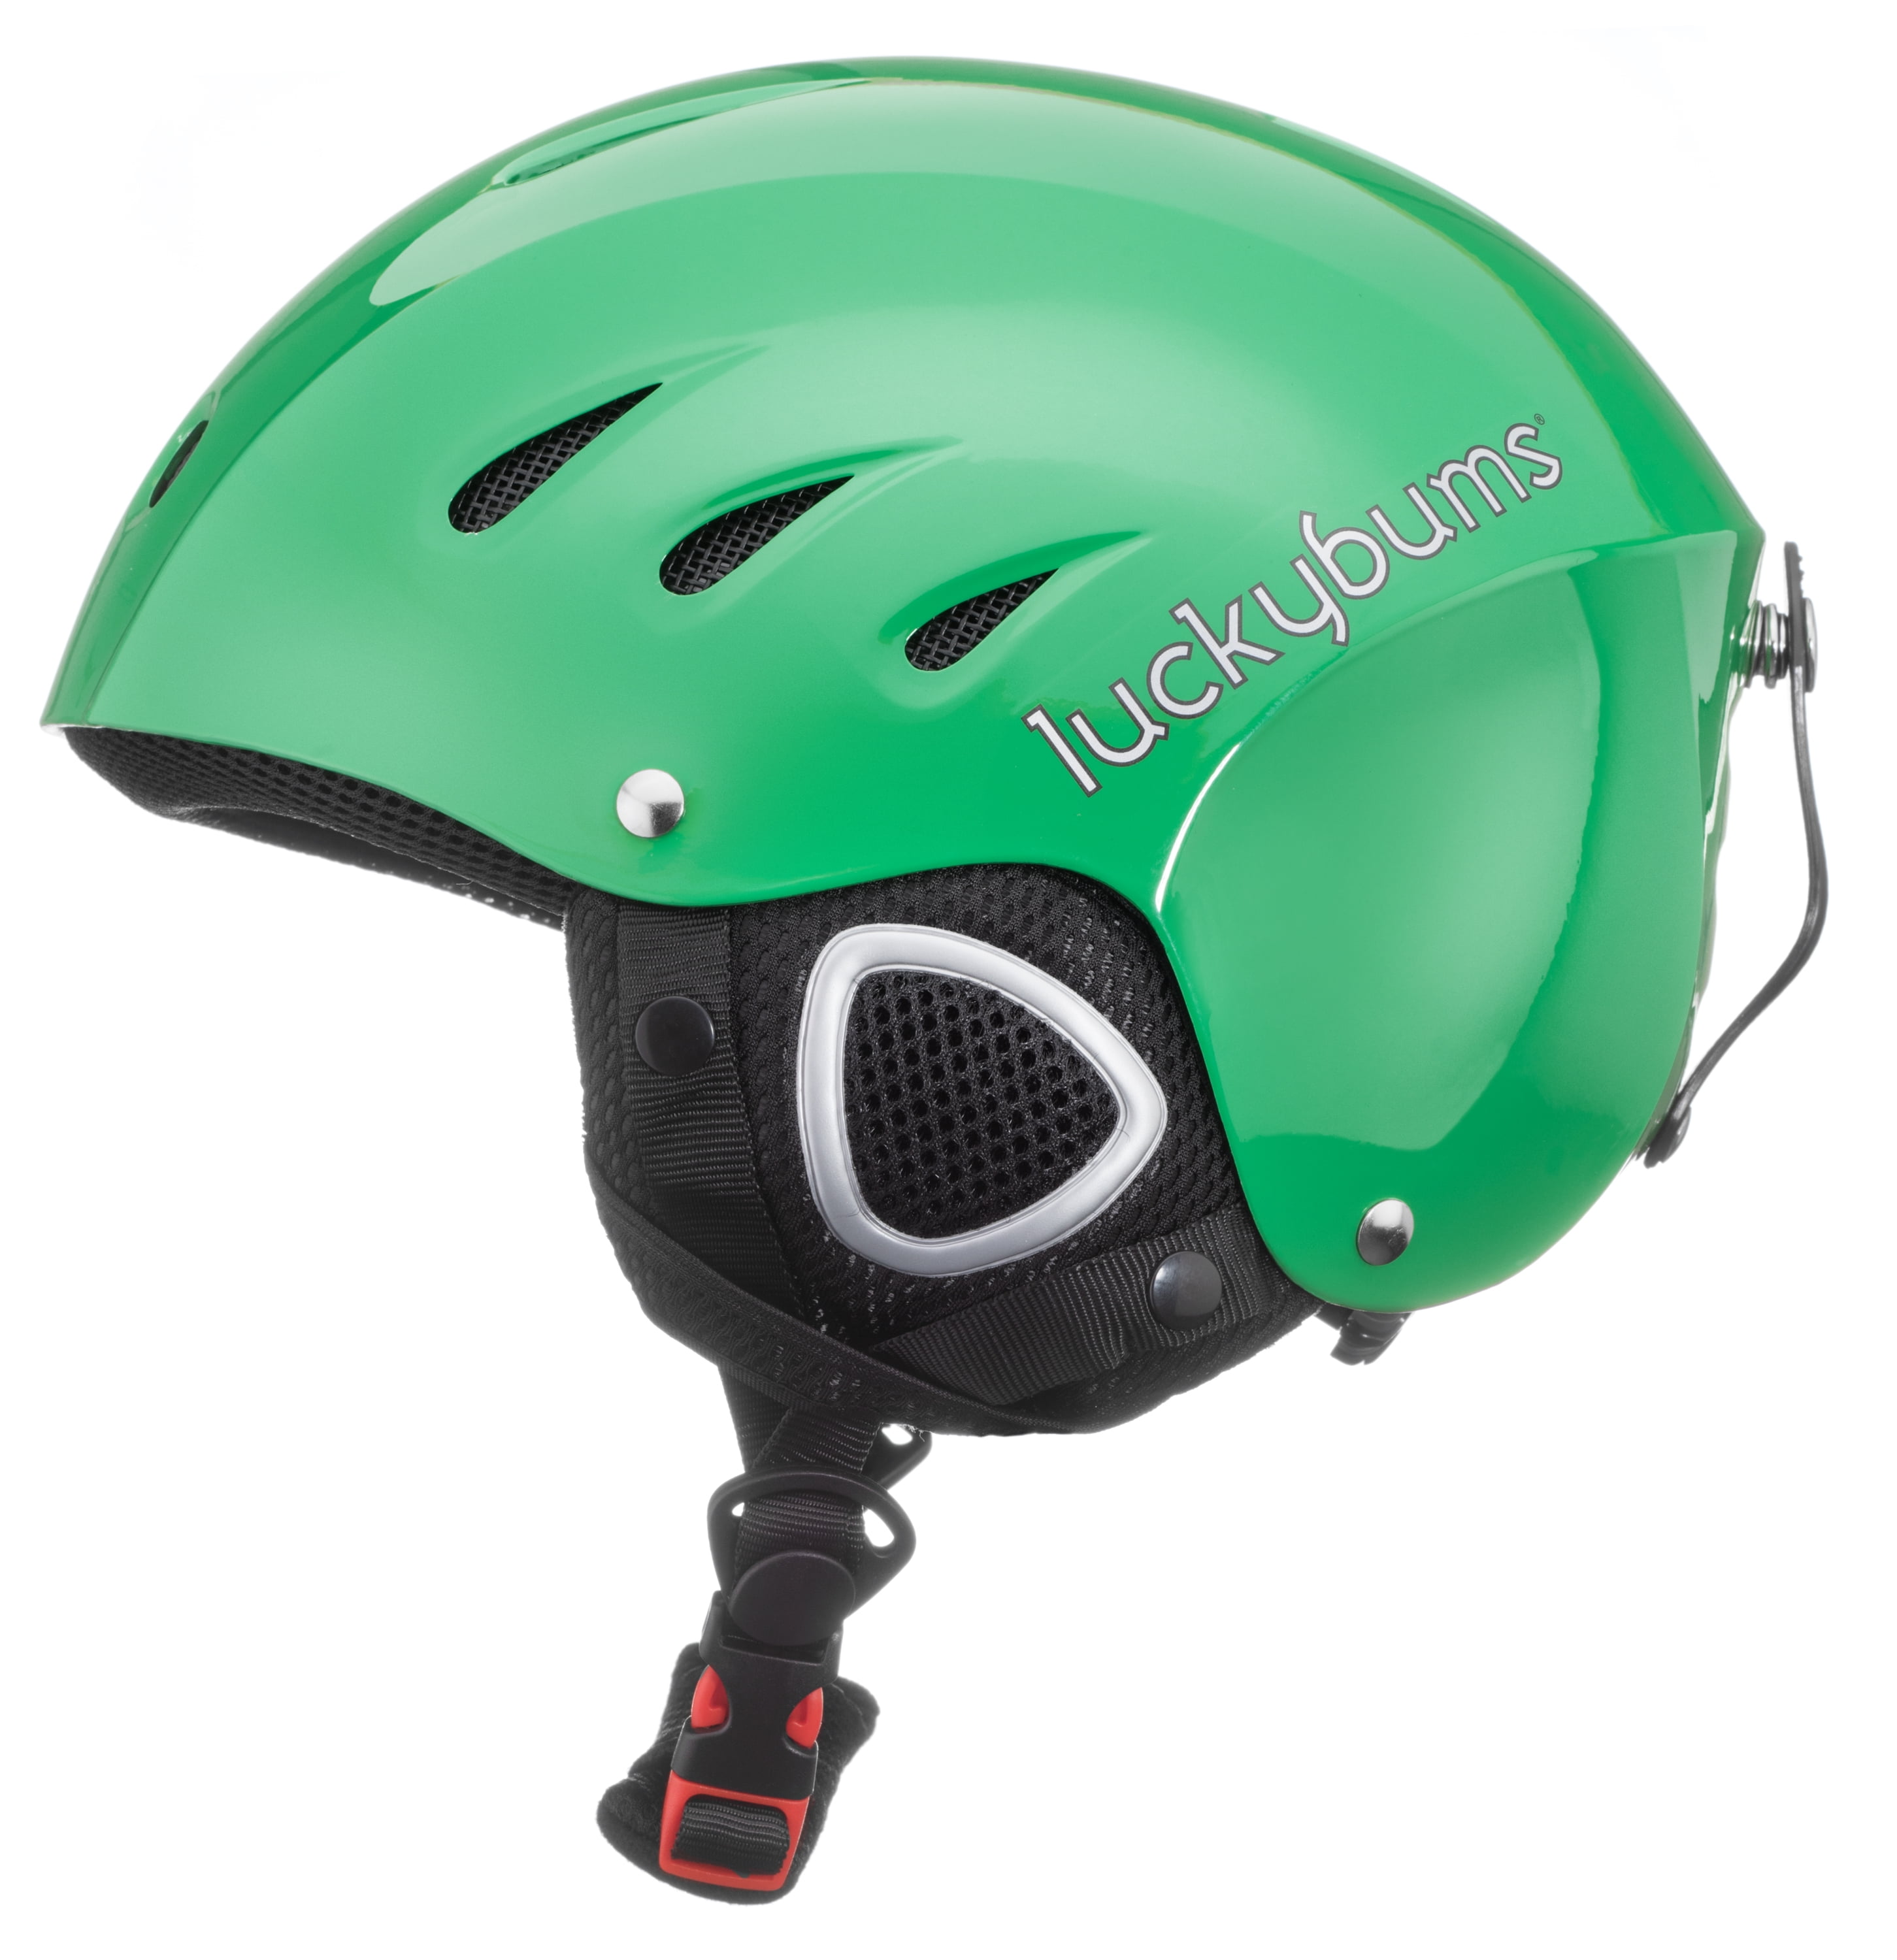 NEW LUCKY BUMS ADULT SKI/SNOWBOARD HELMET..FREE SHIPPING IN THE USA!! 